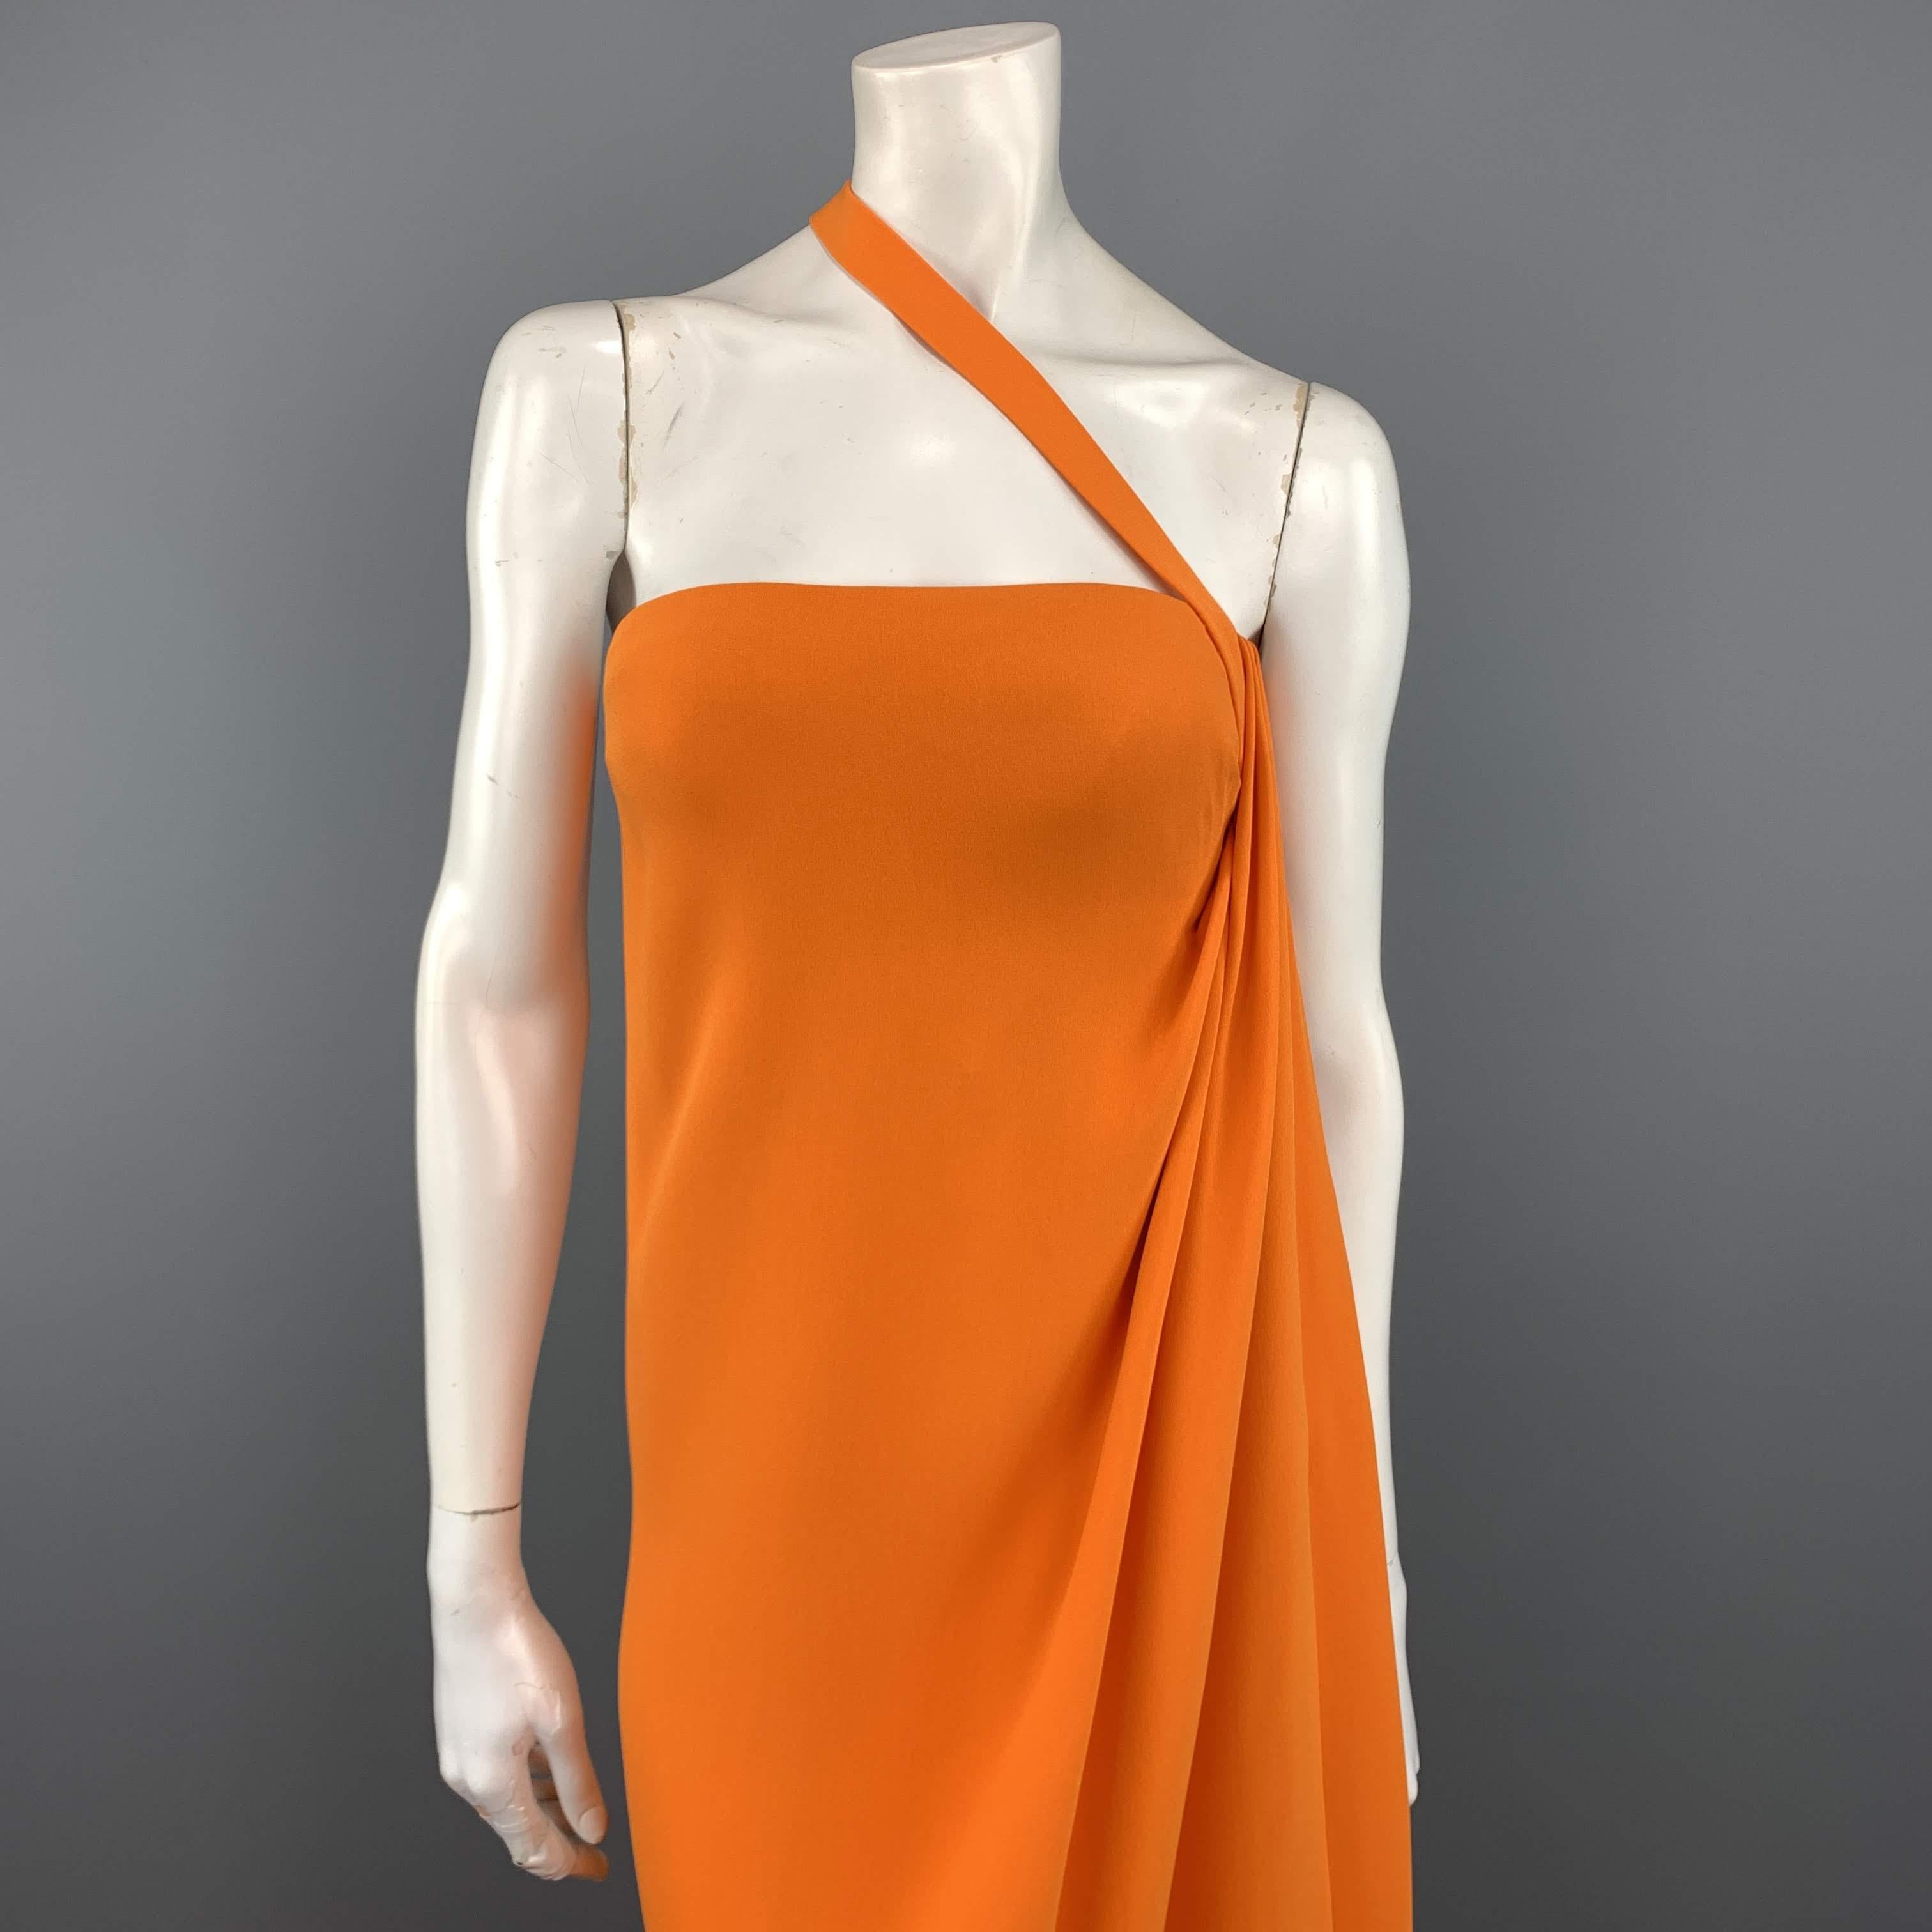 OSCAR DE LA RENTA Resort 2008 Collection gown comes in vibrant orange silk with a bustier top detailed with a diagonal strap, asymmetrical gathered pleat side, and long A line silhouette. Made in USA.
 
Excellent Pre-Owned Condition.
Marked: 8
